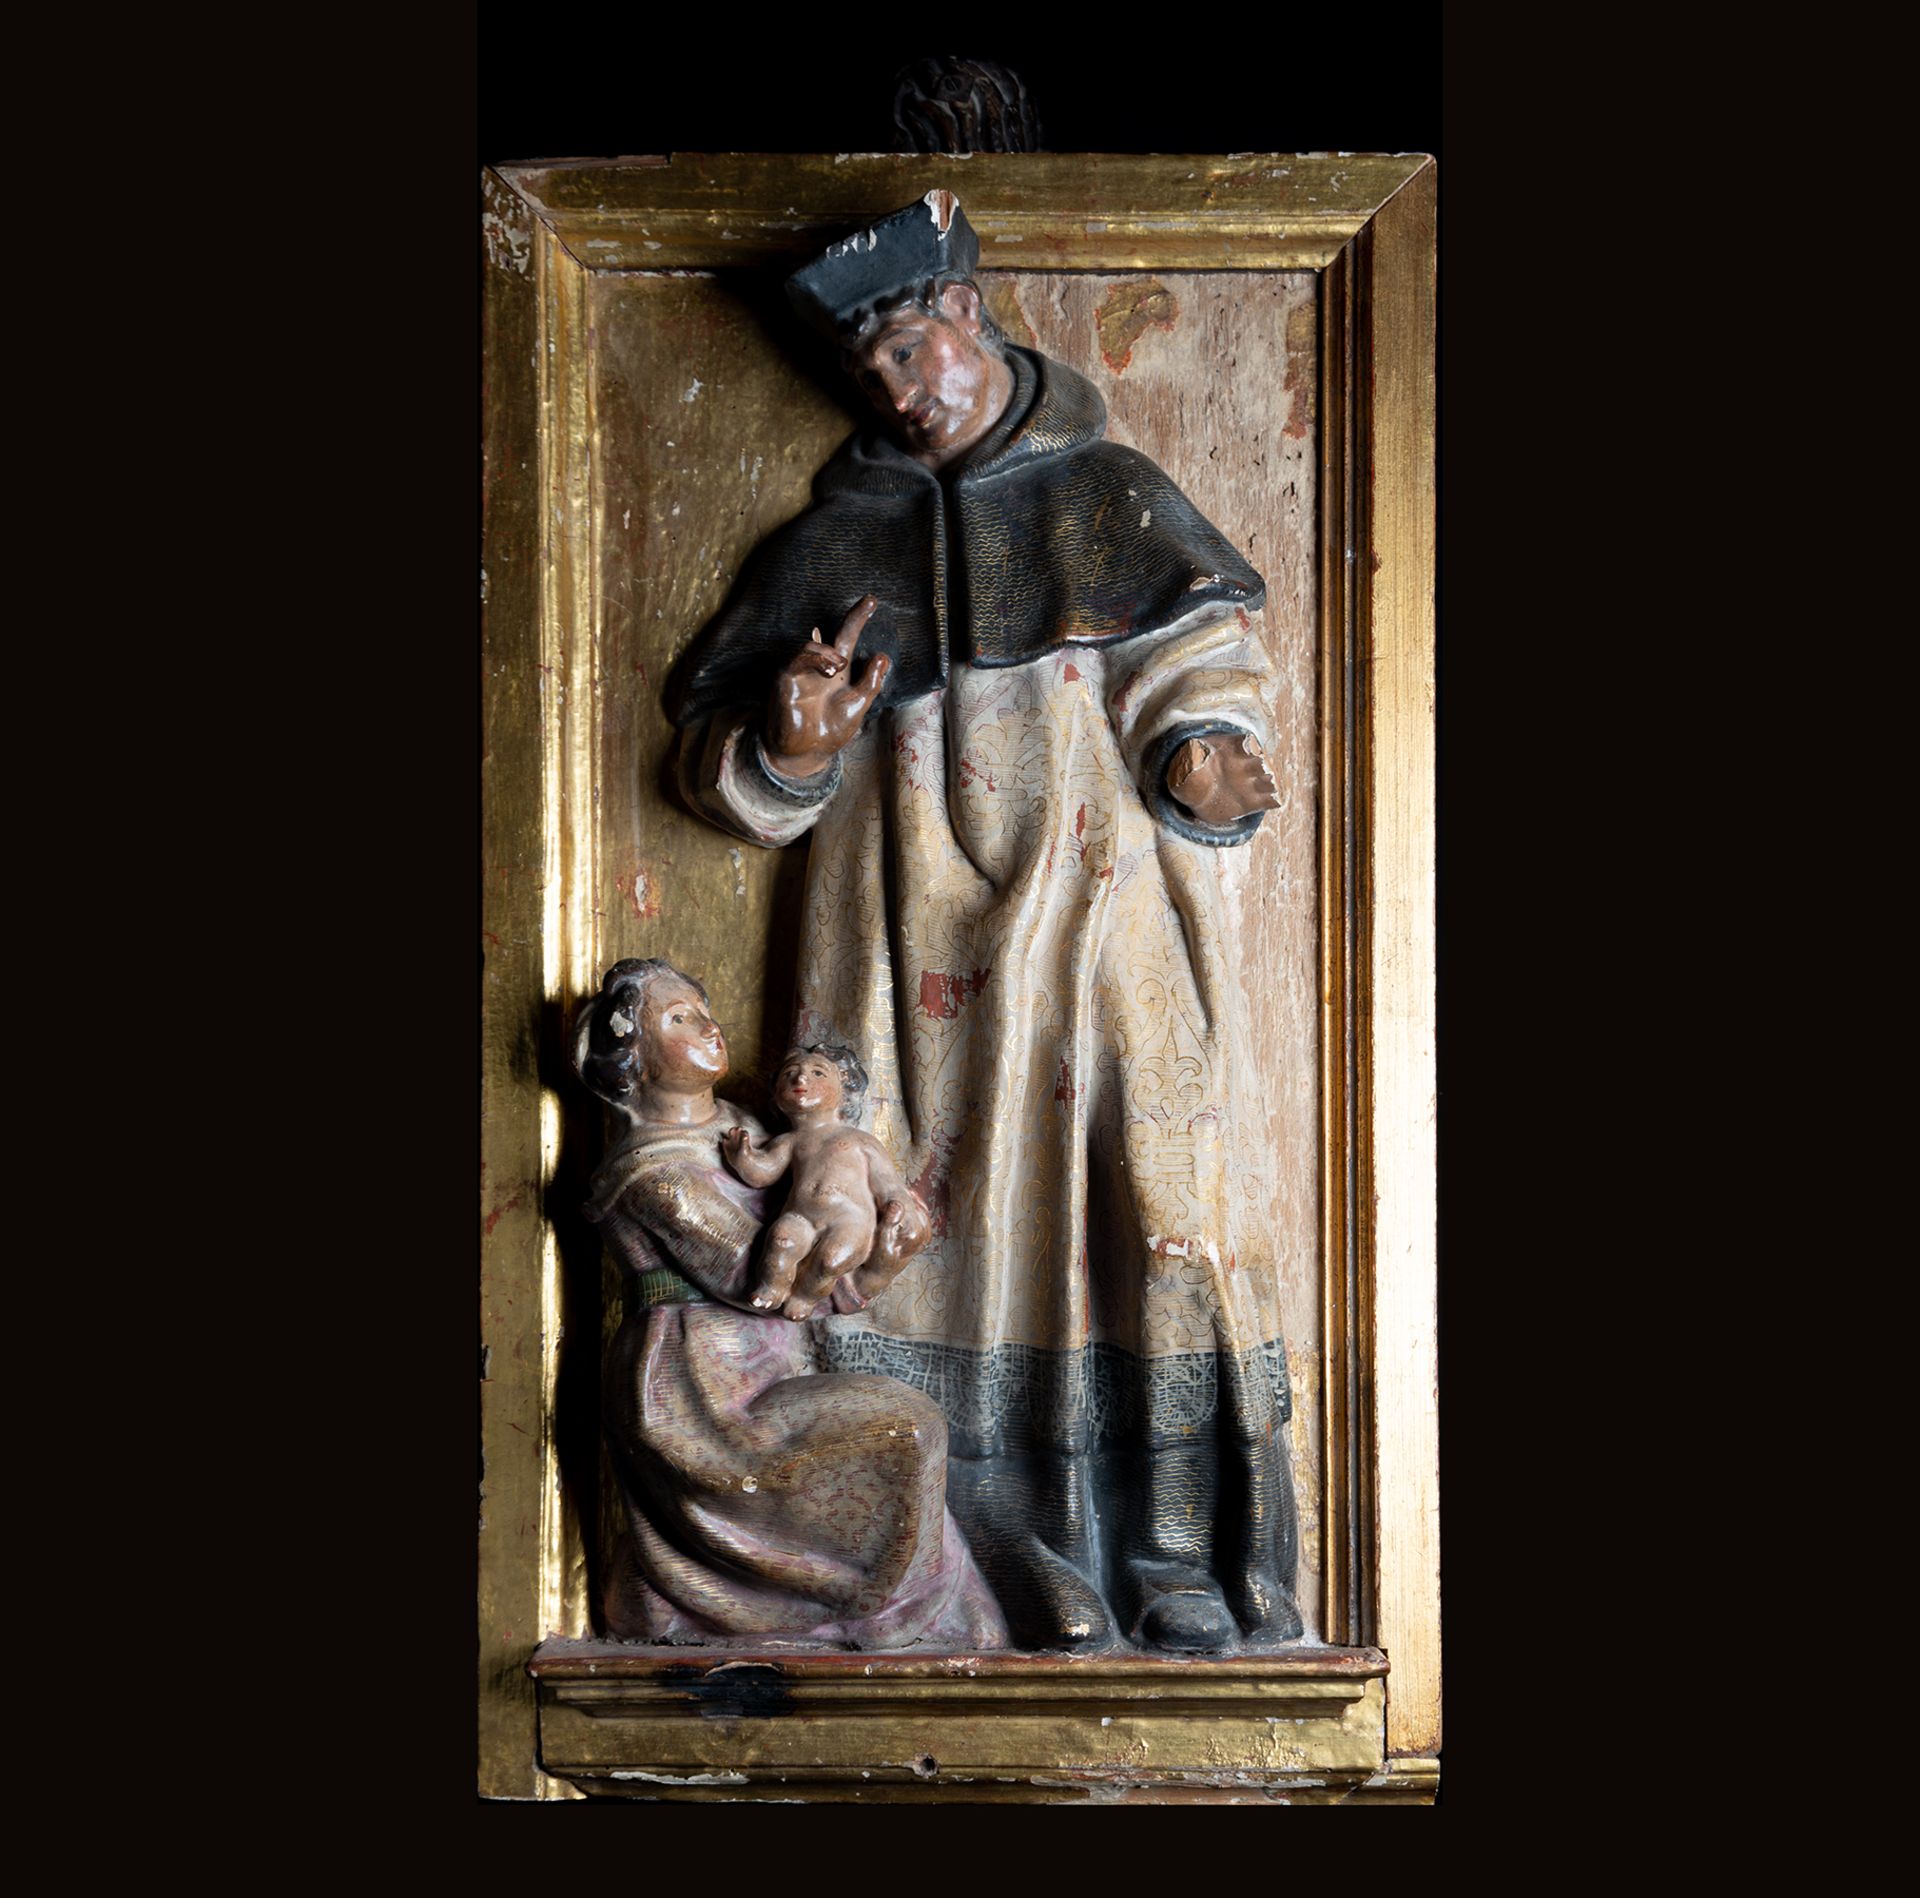 Plateresque relief in gilded and polychrome wood, Castilla, late 16th century